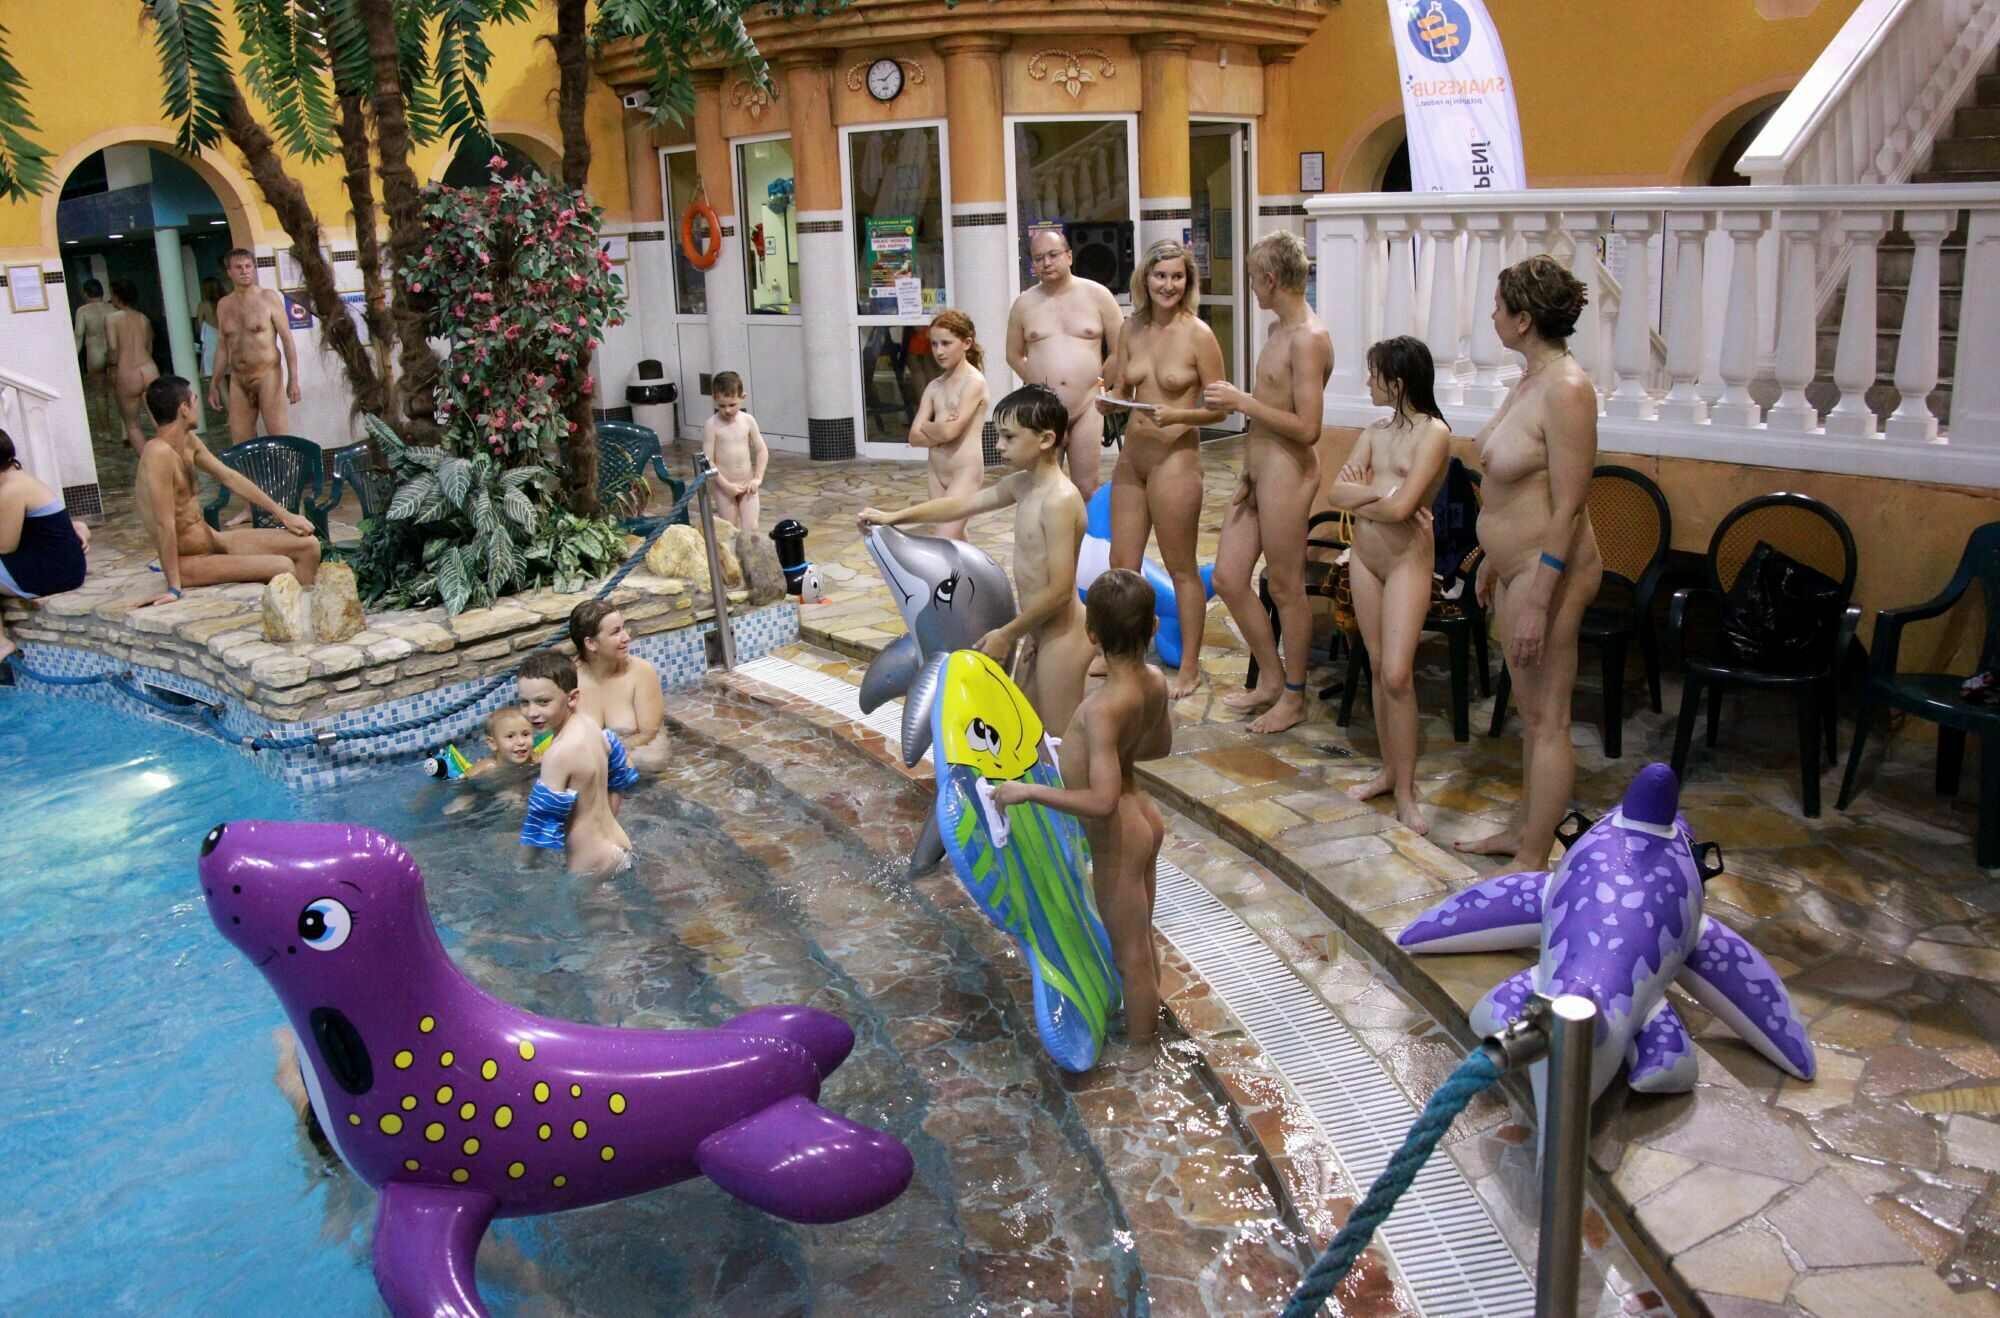 Naturist Family Events Pictures [Indoor Waterside Day]